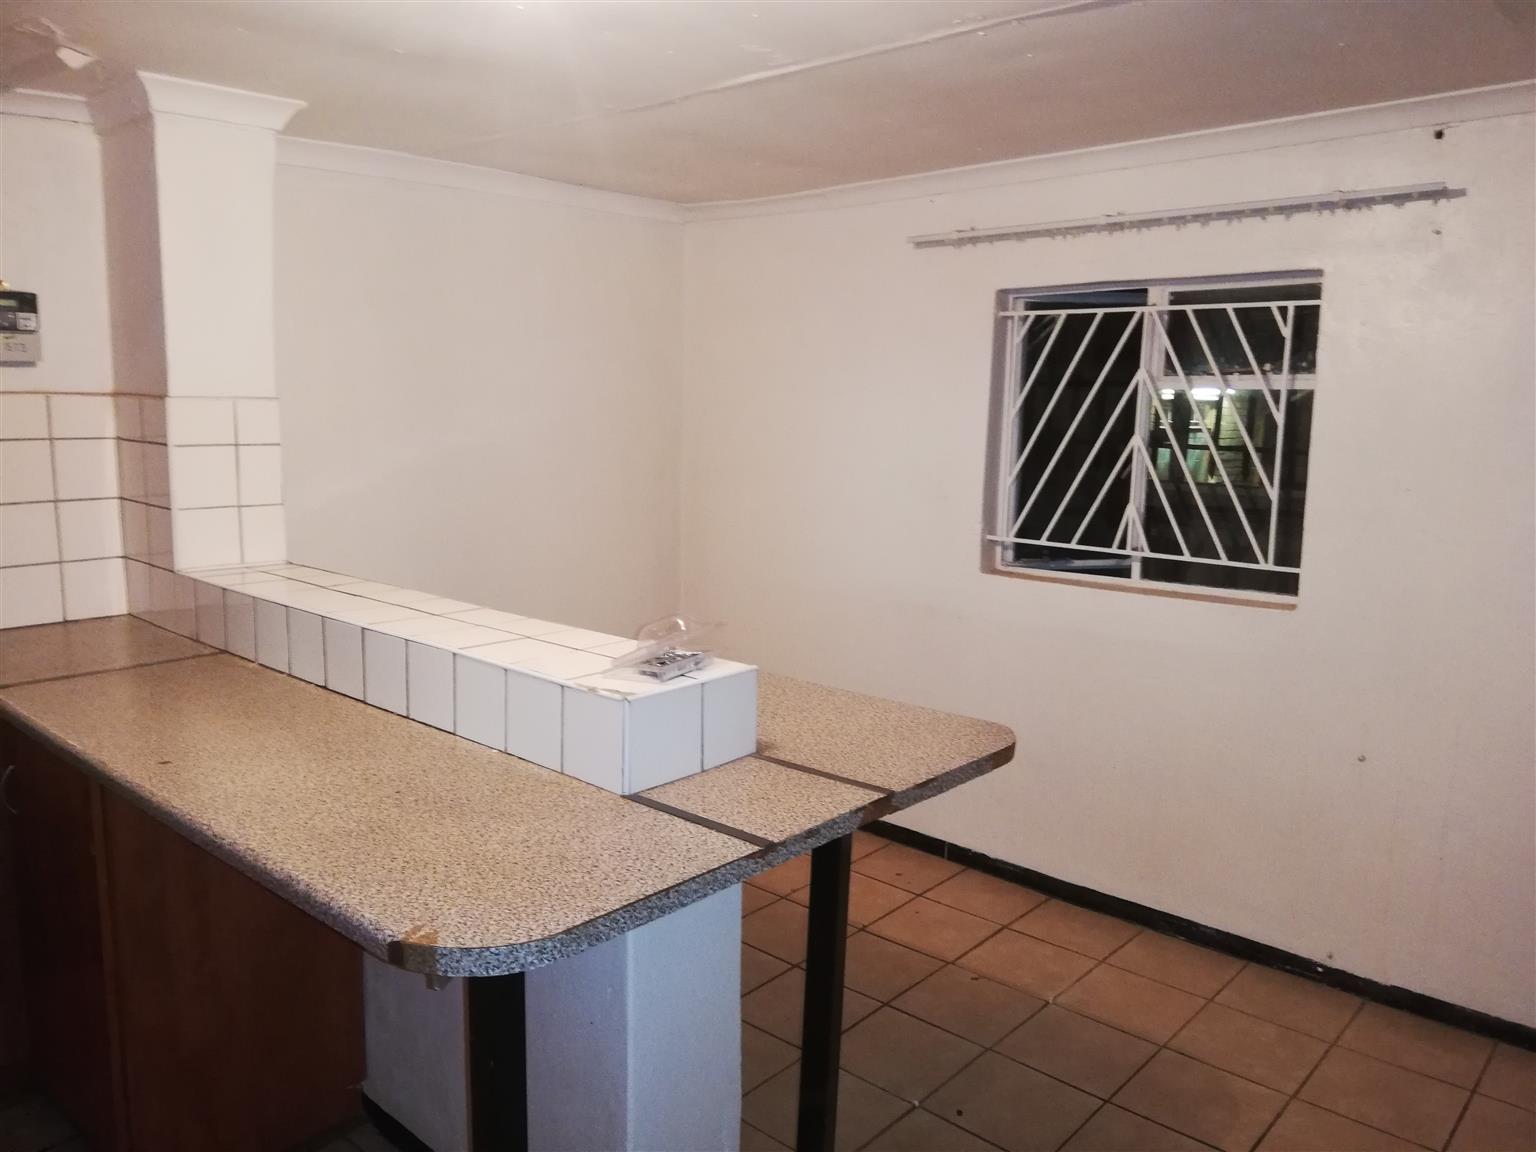 Bachelor apartment to rent in Pretoria west, Kwaggasrand